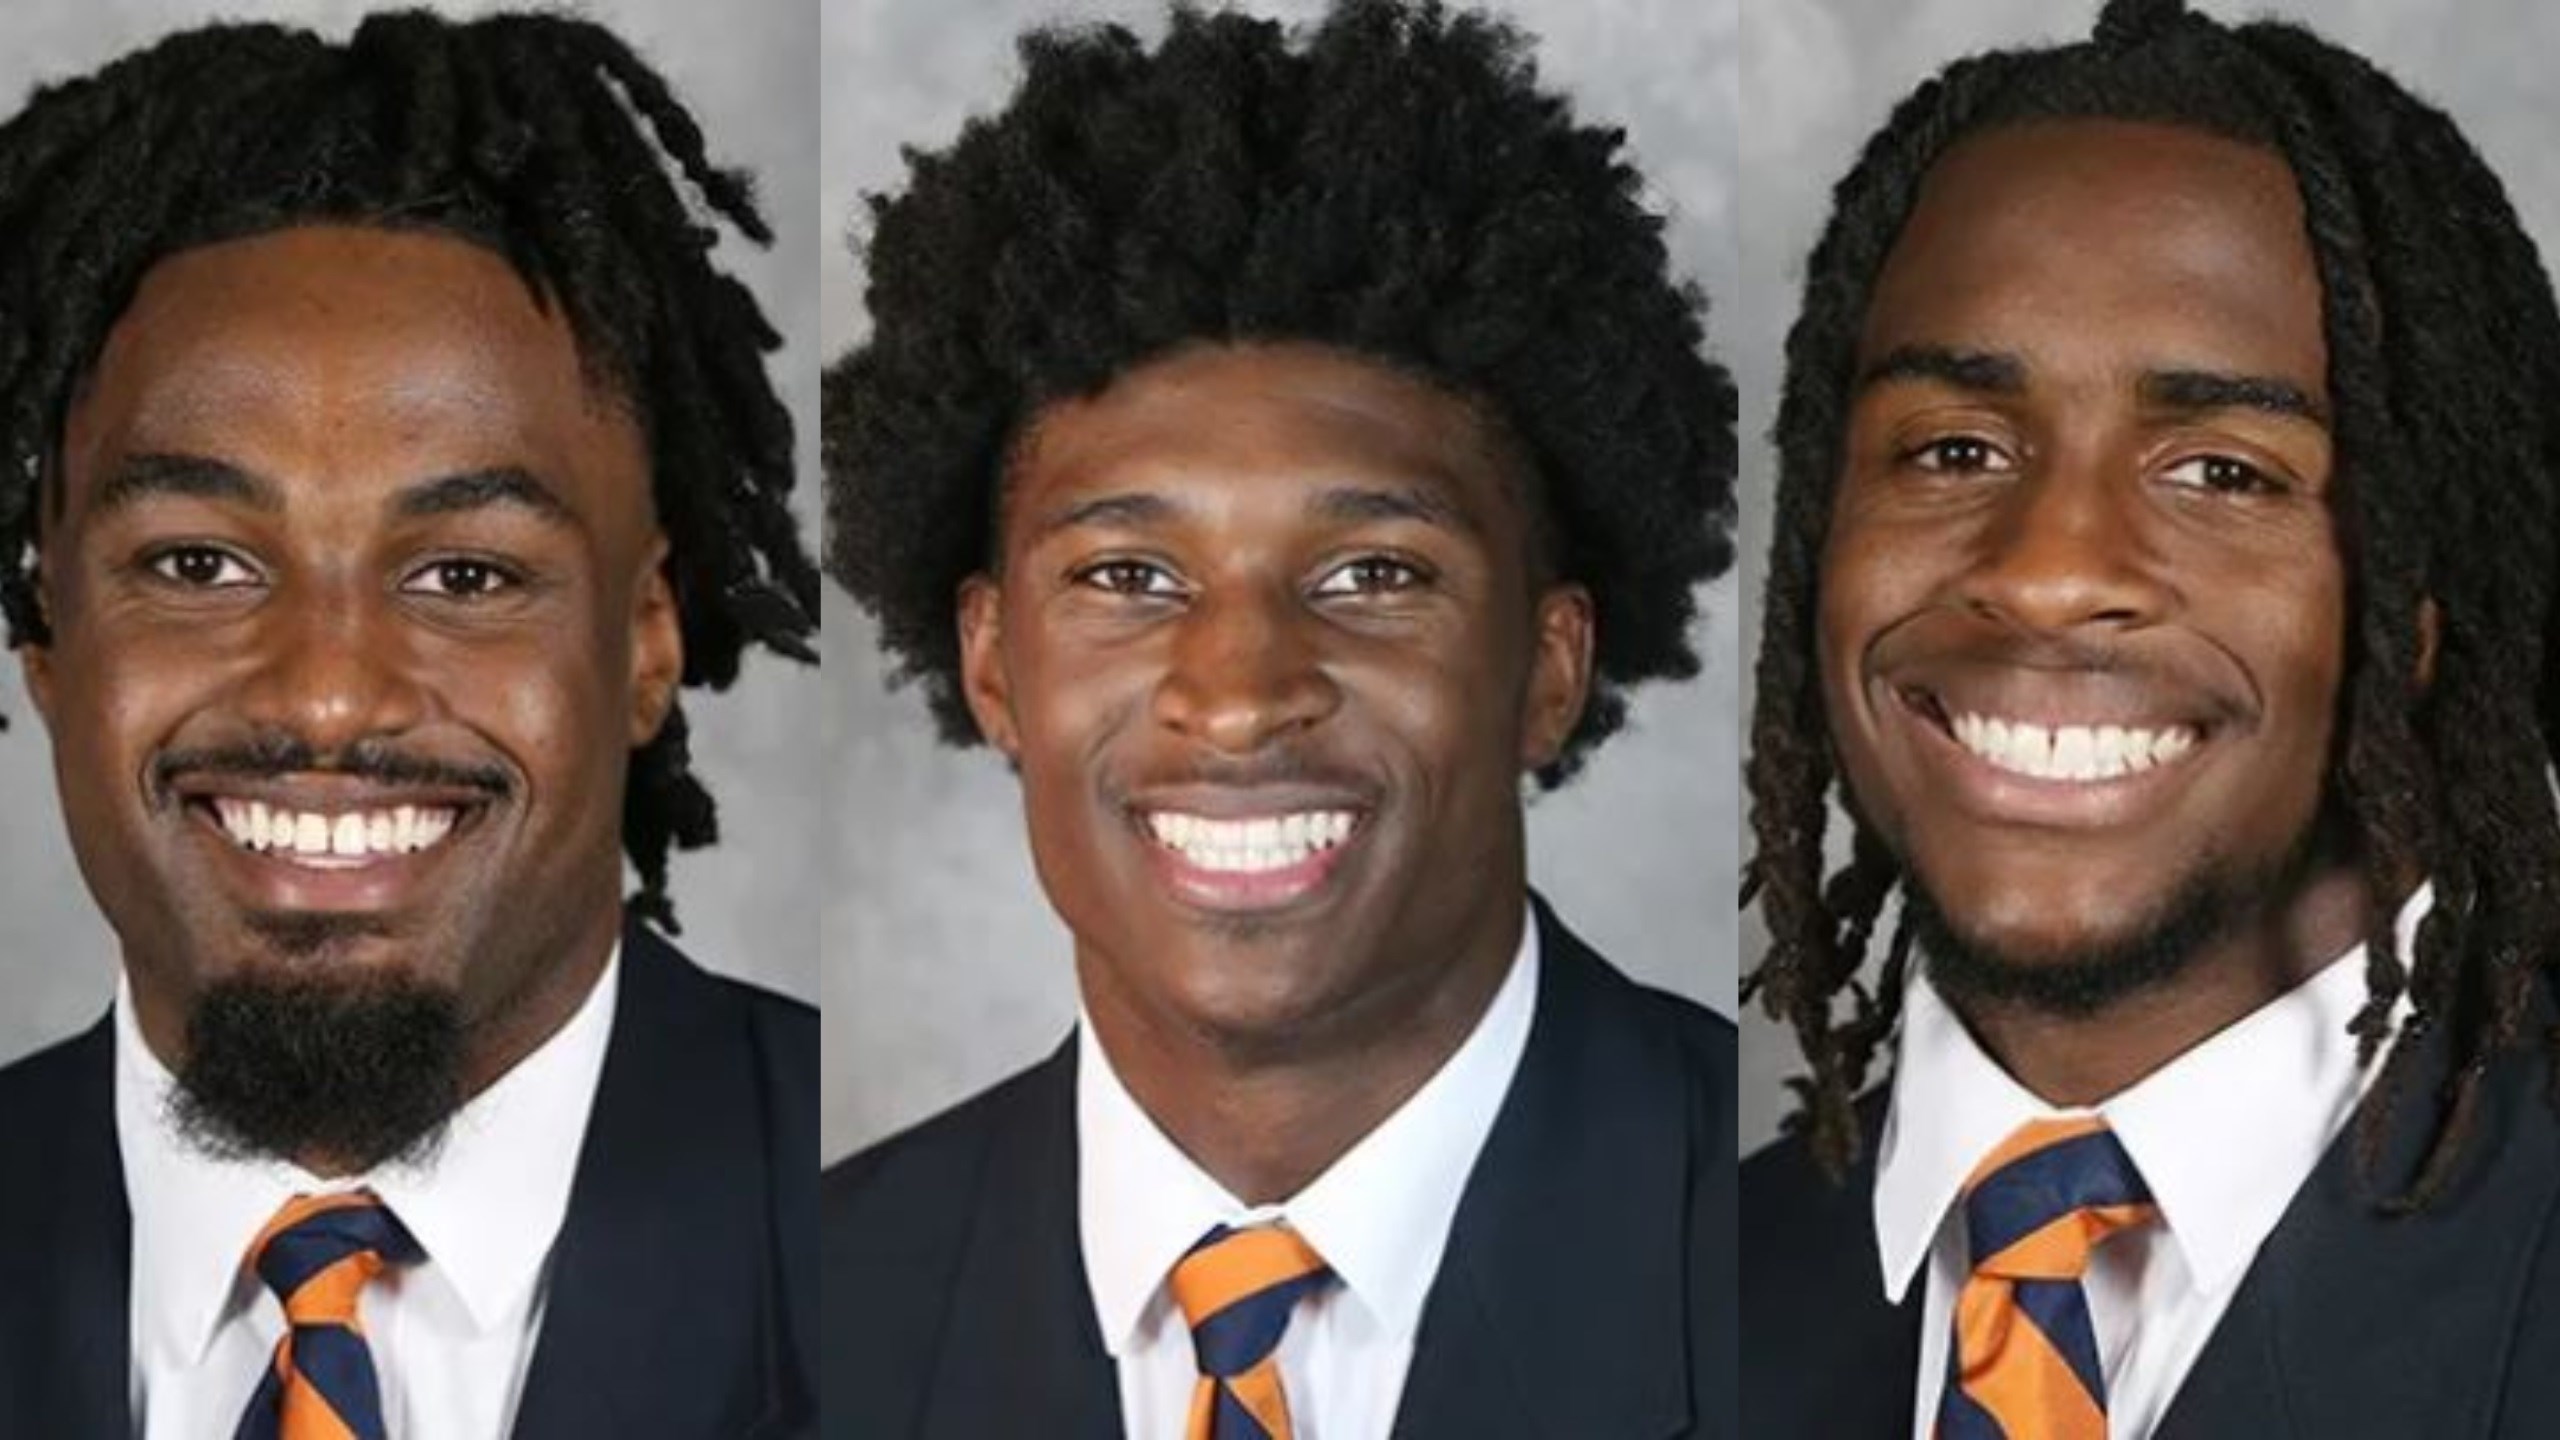 From left: D’Sean Perry, Lavel Davis, Jr. and Devin Chandler. (UVA Athletics)